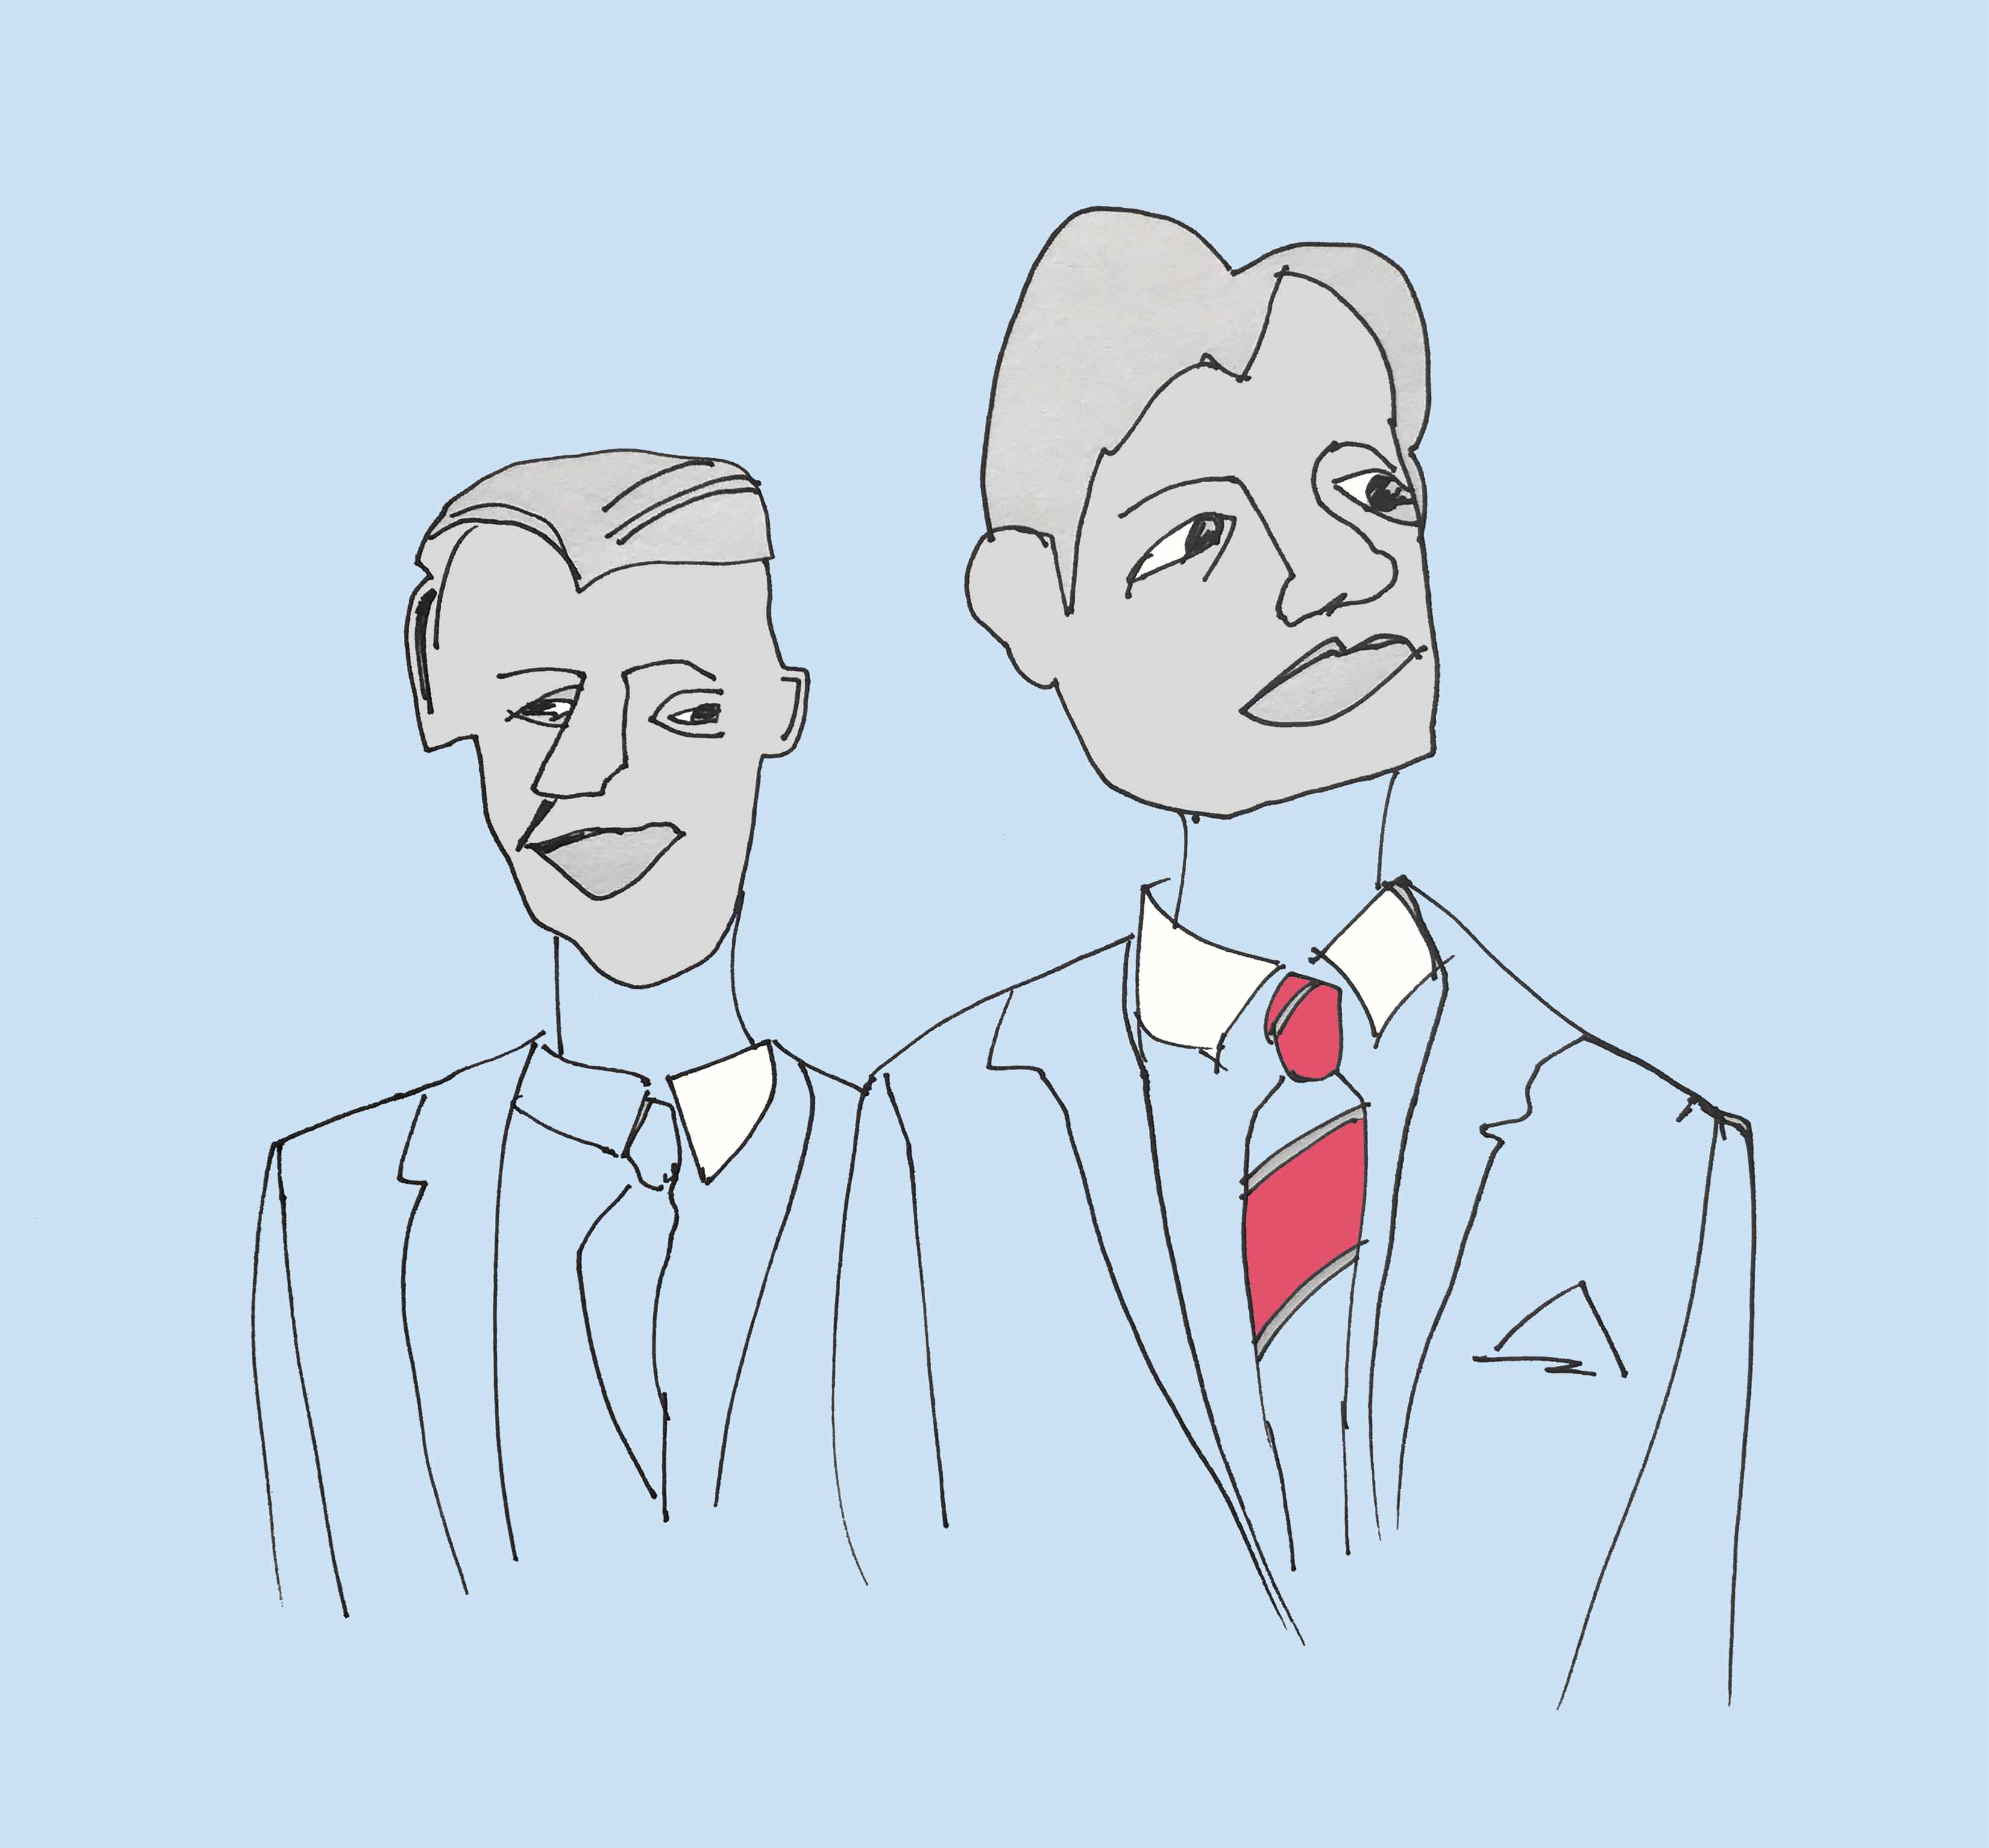 art every day number 195 white shirts men in suites illustration